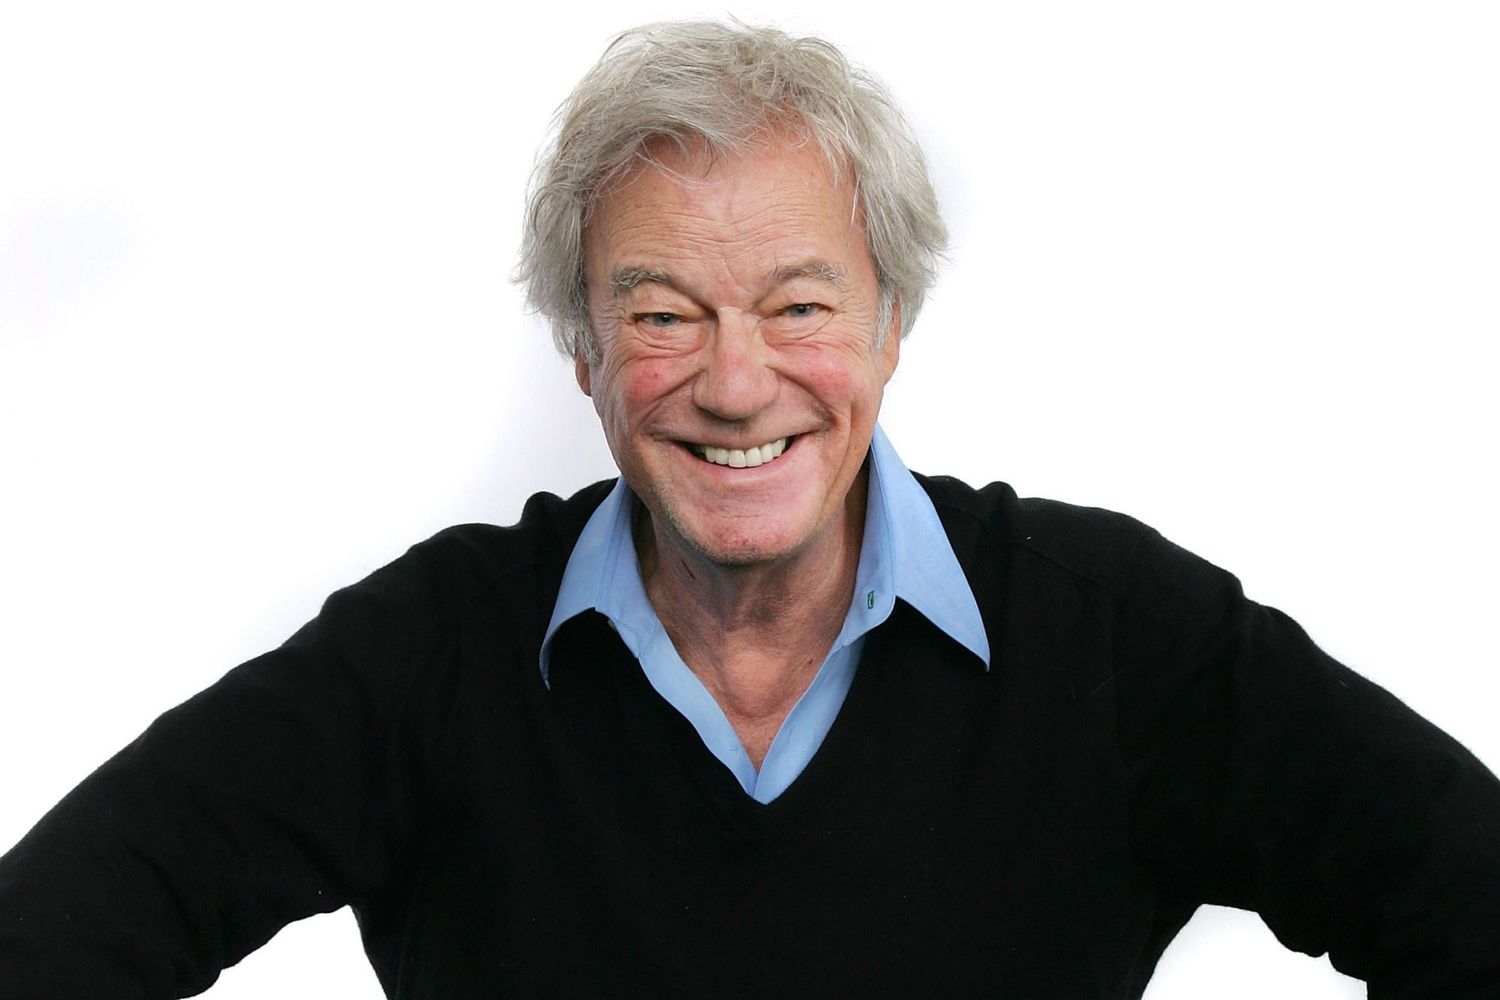 TORONTO - SEPTEMBER 11: Actor Gordon Pinsent of the film "Away From Her" poses for portraits in the Chanel Celebrity Suite at the Four Season hotel during the Toronto International Film Festival on September 11, 2006 in Toronto, Canada. (Photo by Carlo Allegri/Getty Images)